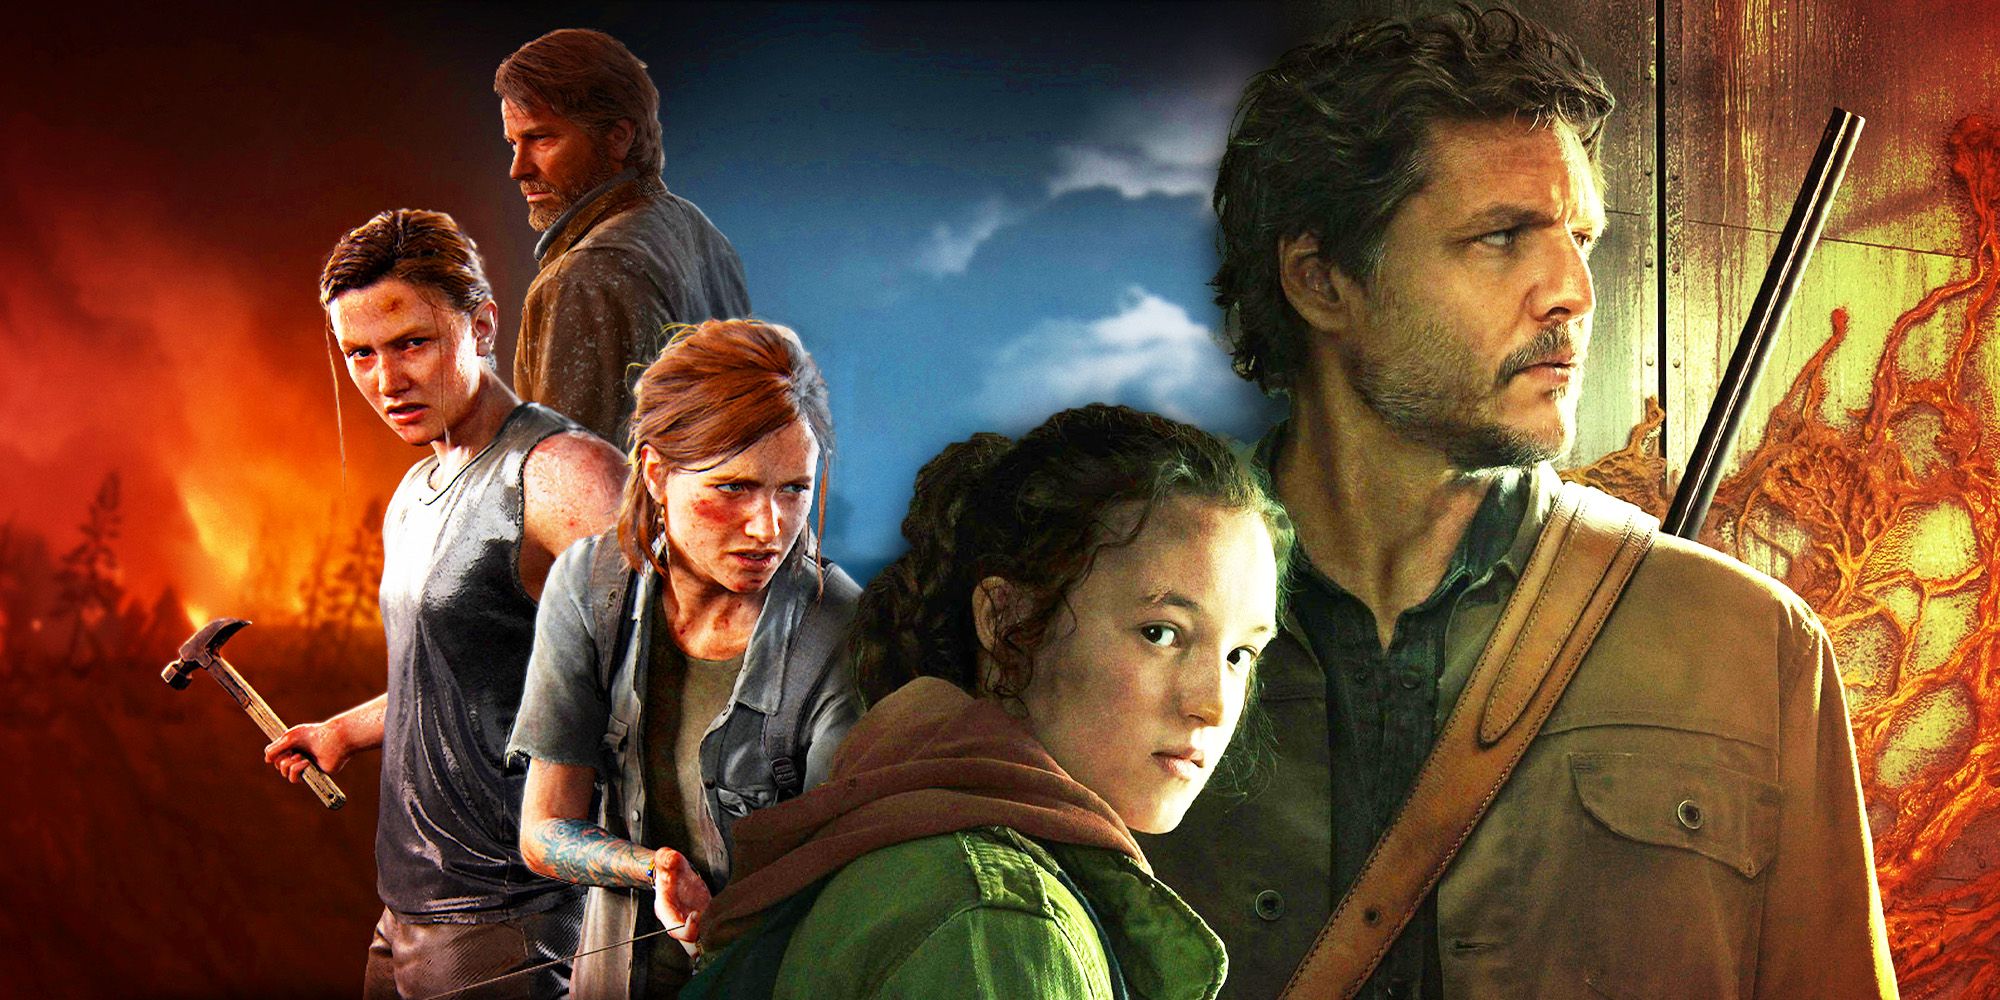 An image of Joel, Abby, and Ellie from The Last of Us Part II next to Bella Ramsey's Ellie and Pedro Pascal's Joel from HBO's The Last of Us show